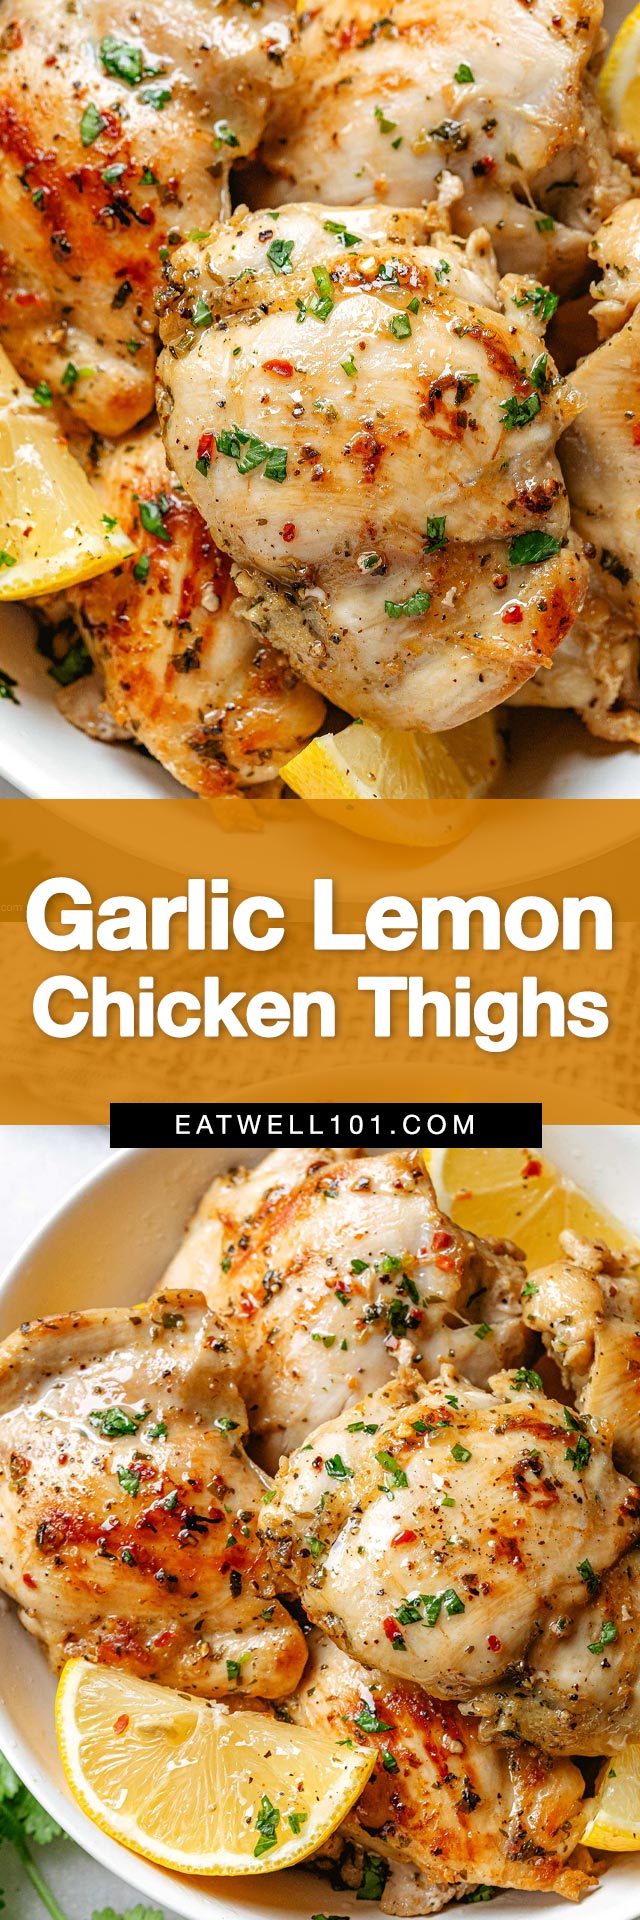 Garlic Lemon Chicken Thighs - #chicken #recipes #eatwell101 - Marinated and seared chicken thighs come out perfectly juicy and tender every time. These boneless skinless chicken thighs are your new dinner routine!